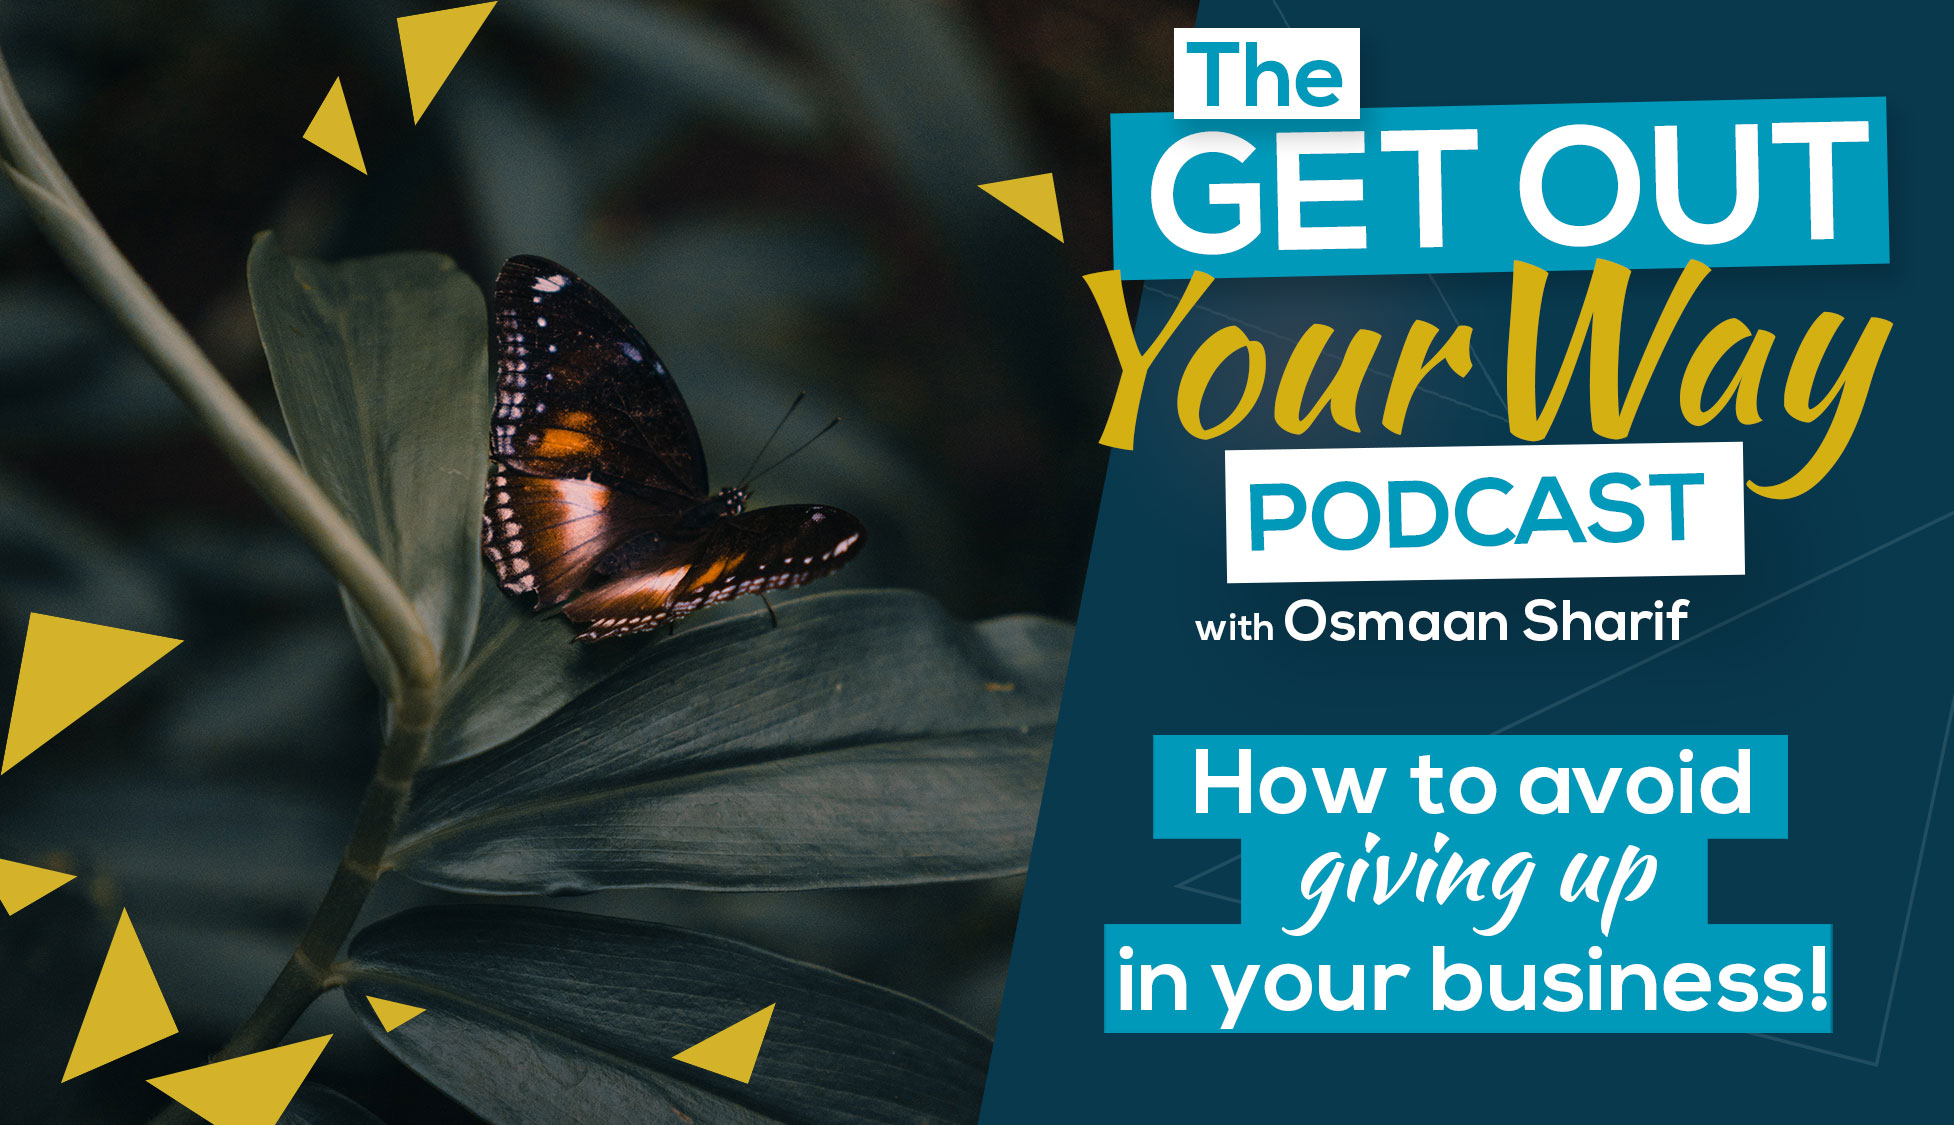 How to avoid giving up in your business